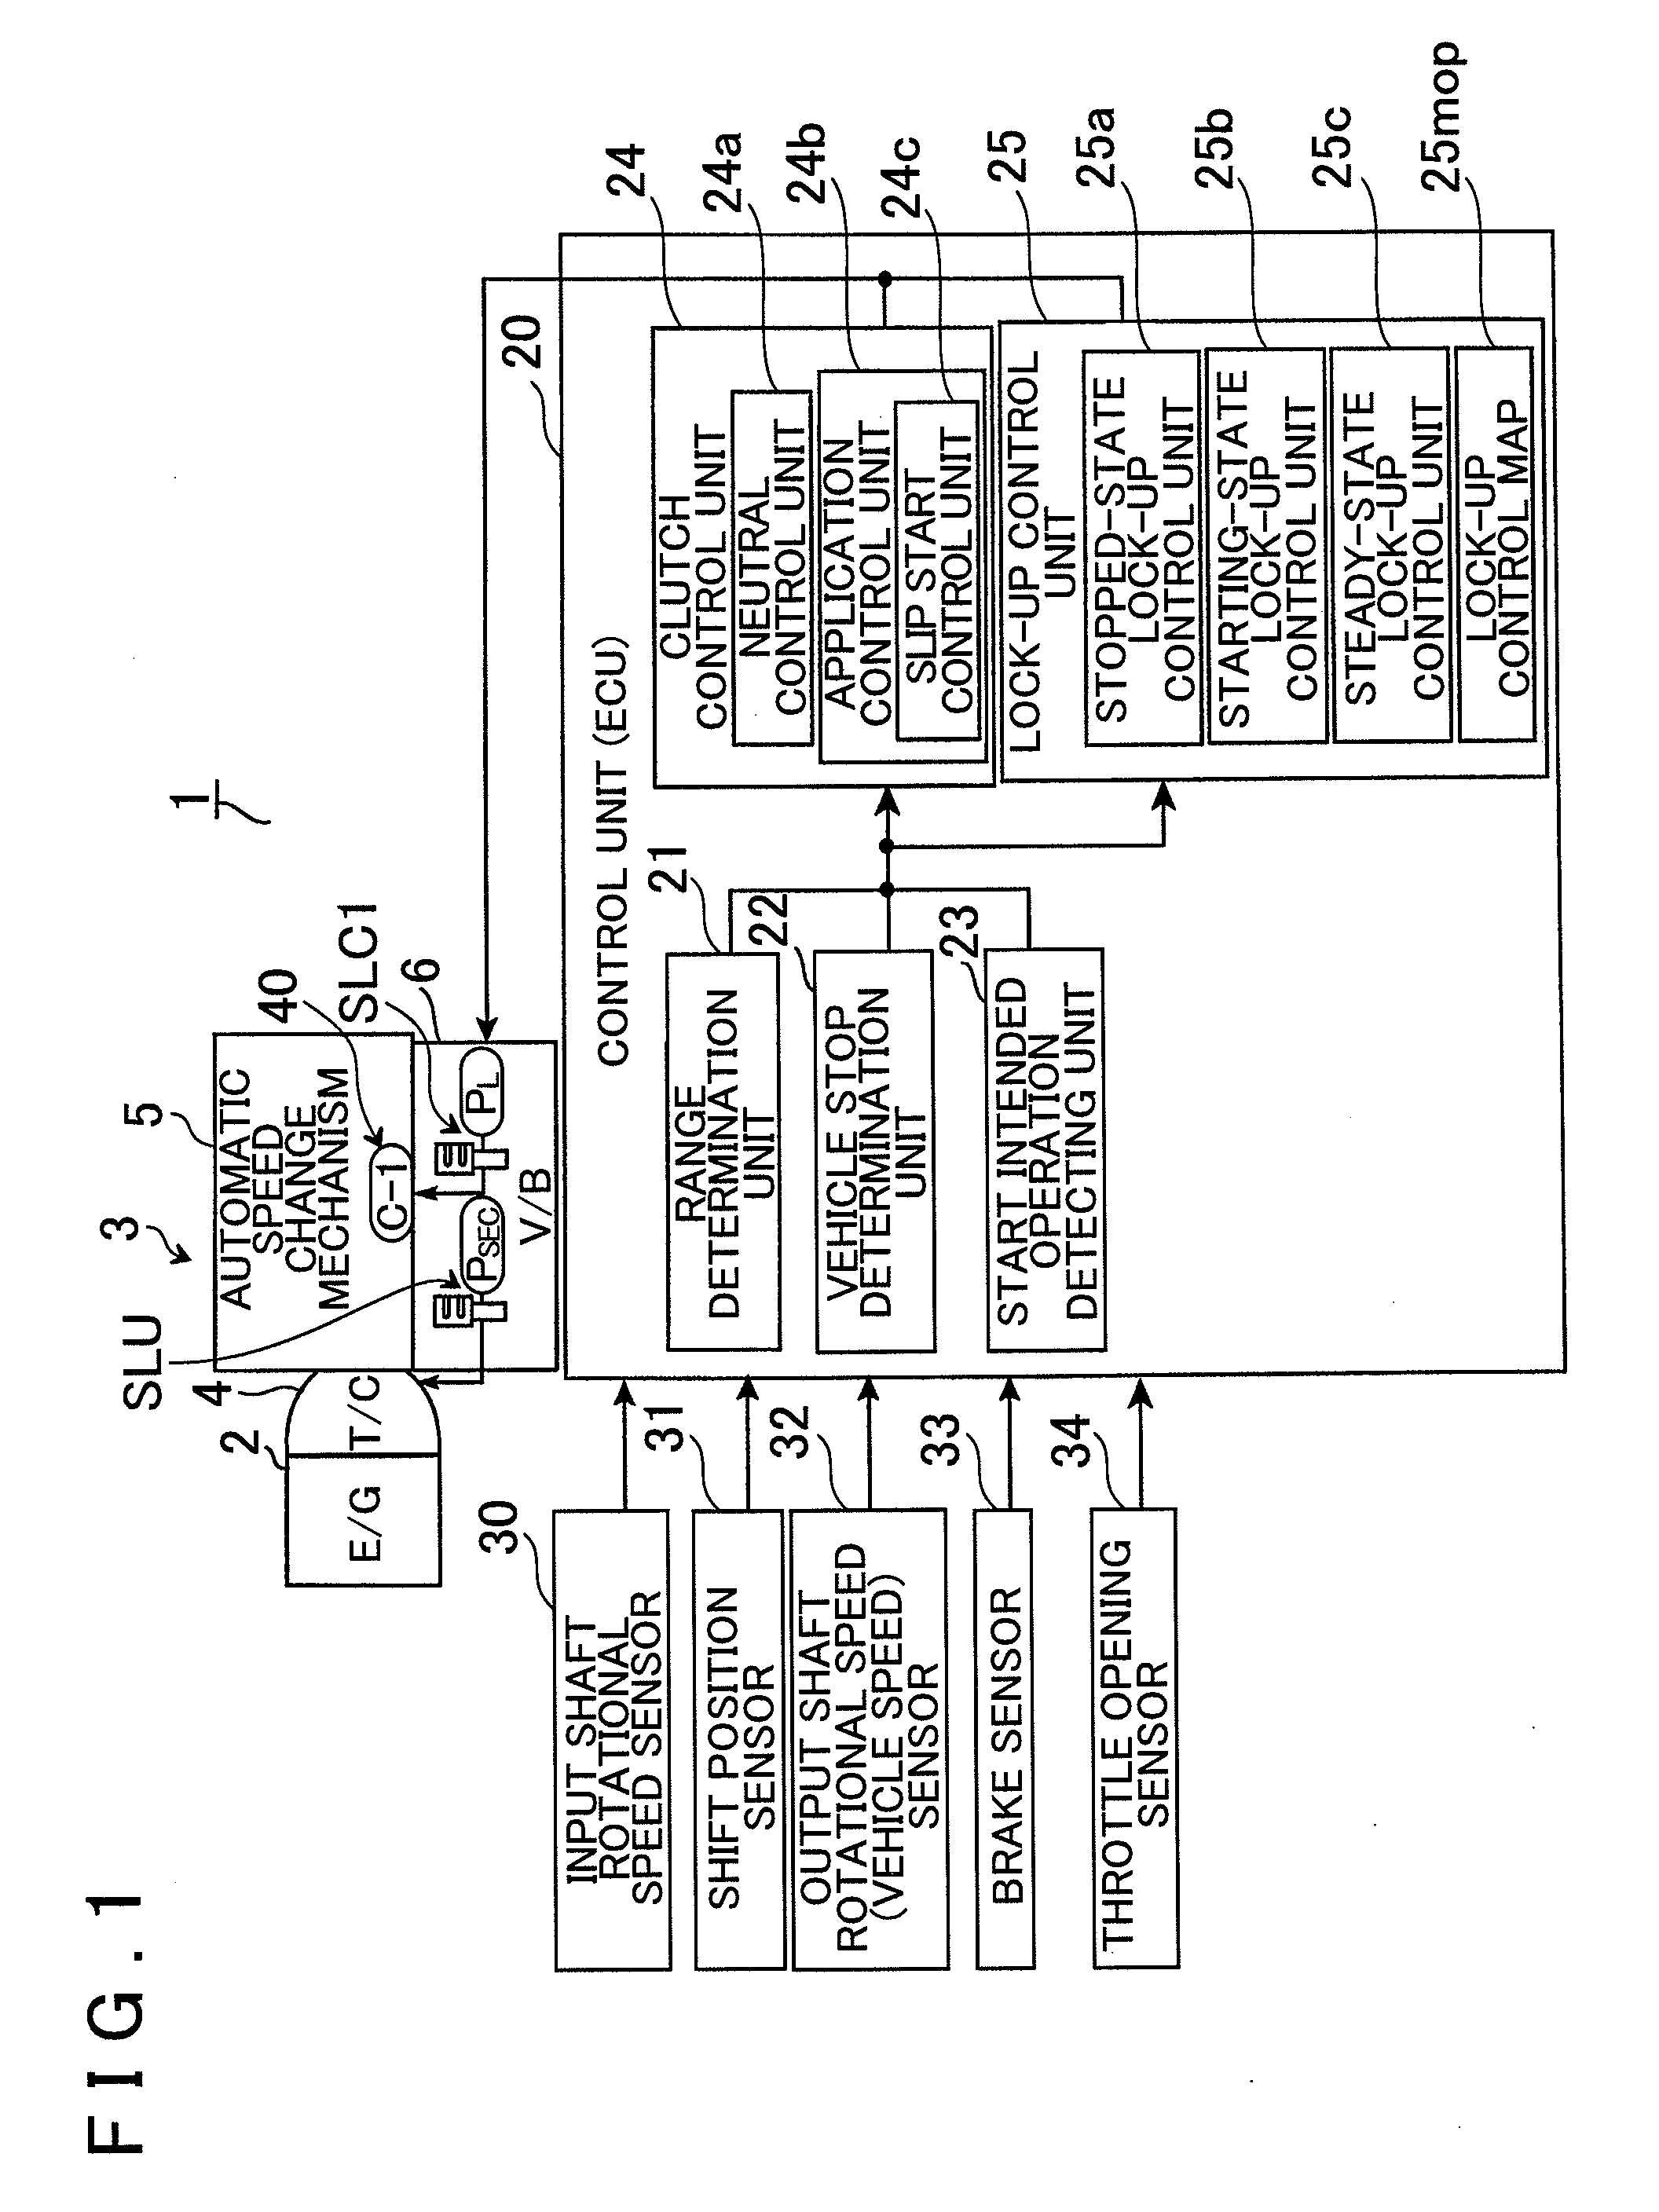 Control apparatus of automatic transmission